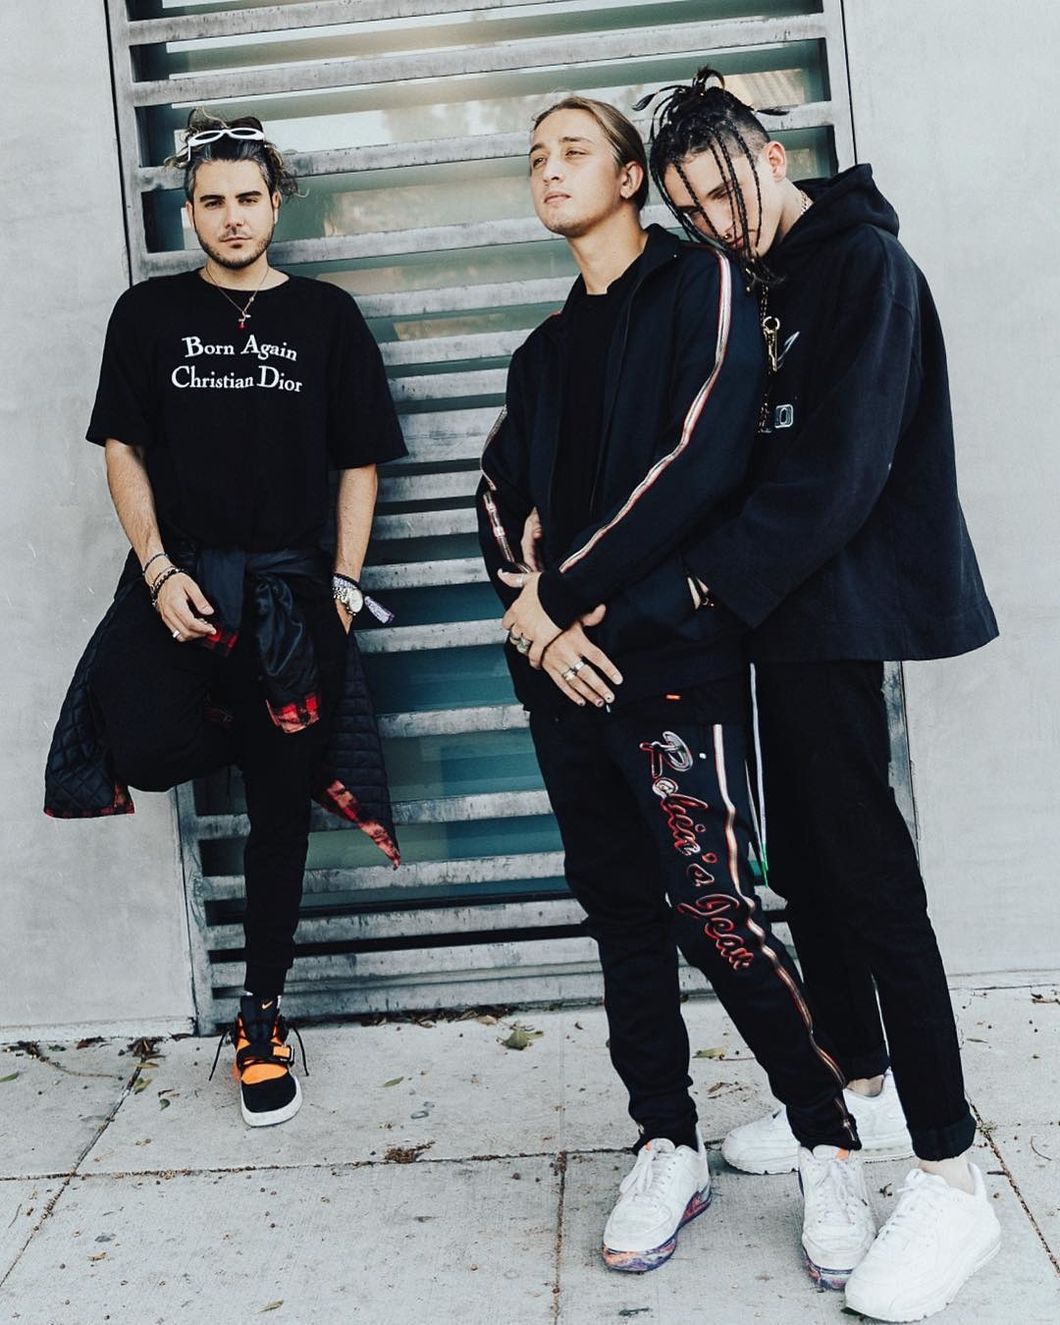 Chase Atlantic - DON'T TRY THIS Lyrics and Tracklist